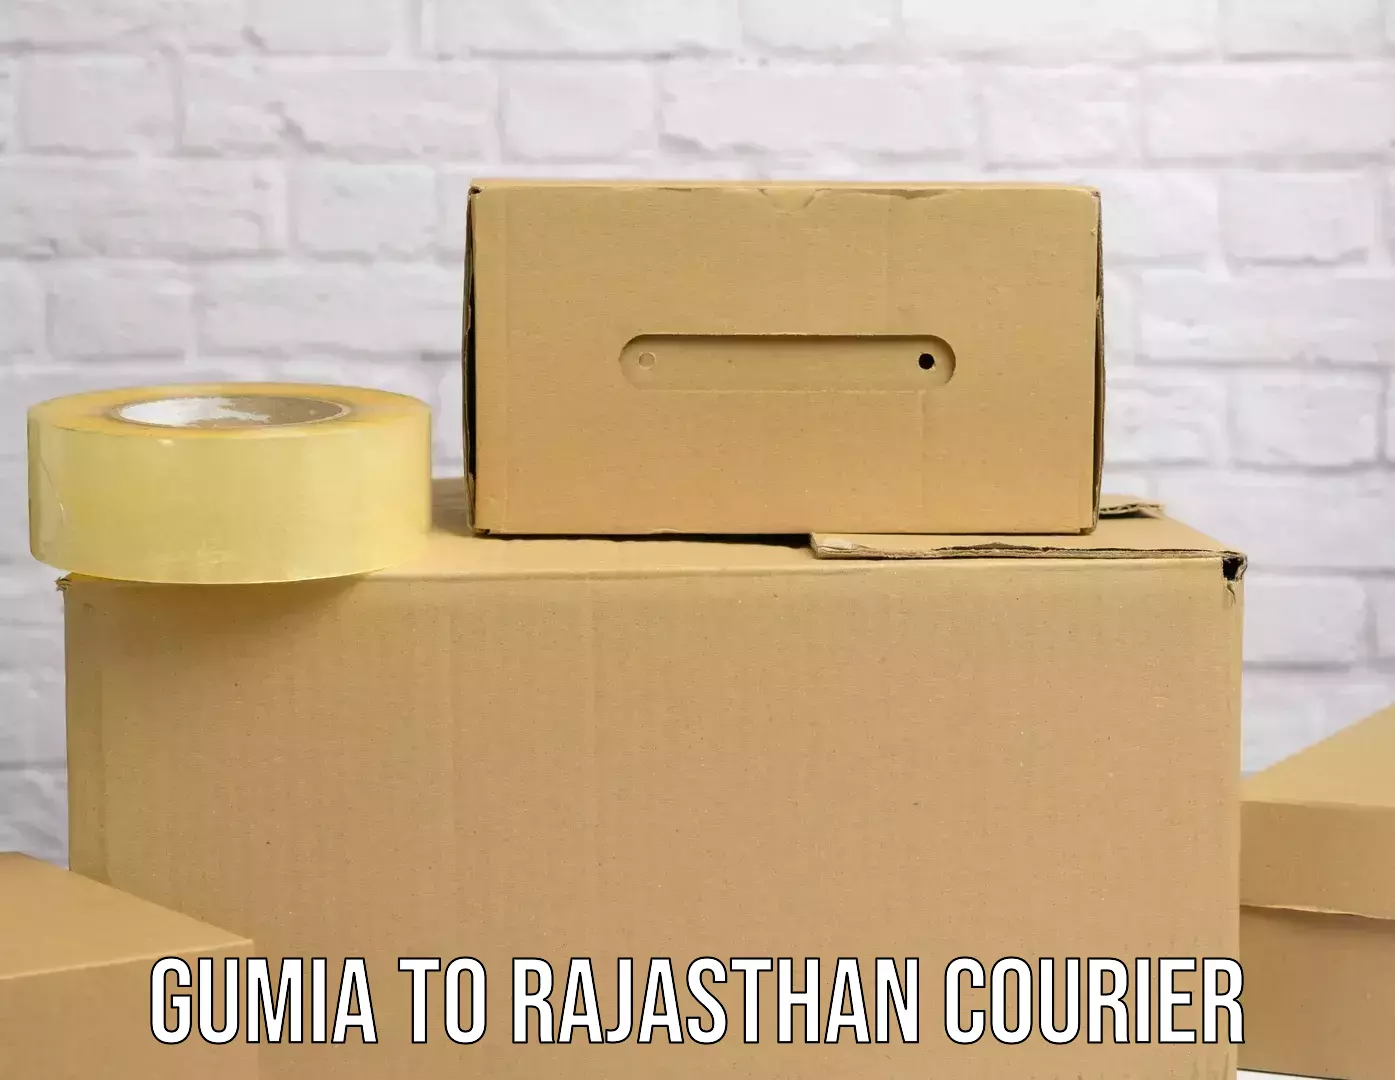 Online shipping calculator in Gumia to Dungarpur